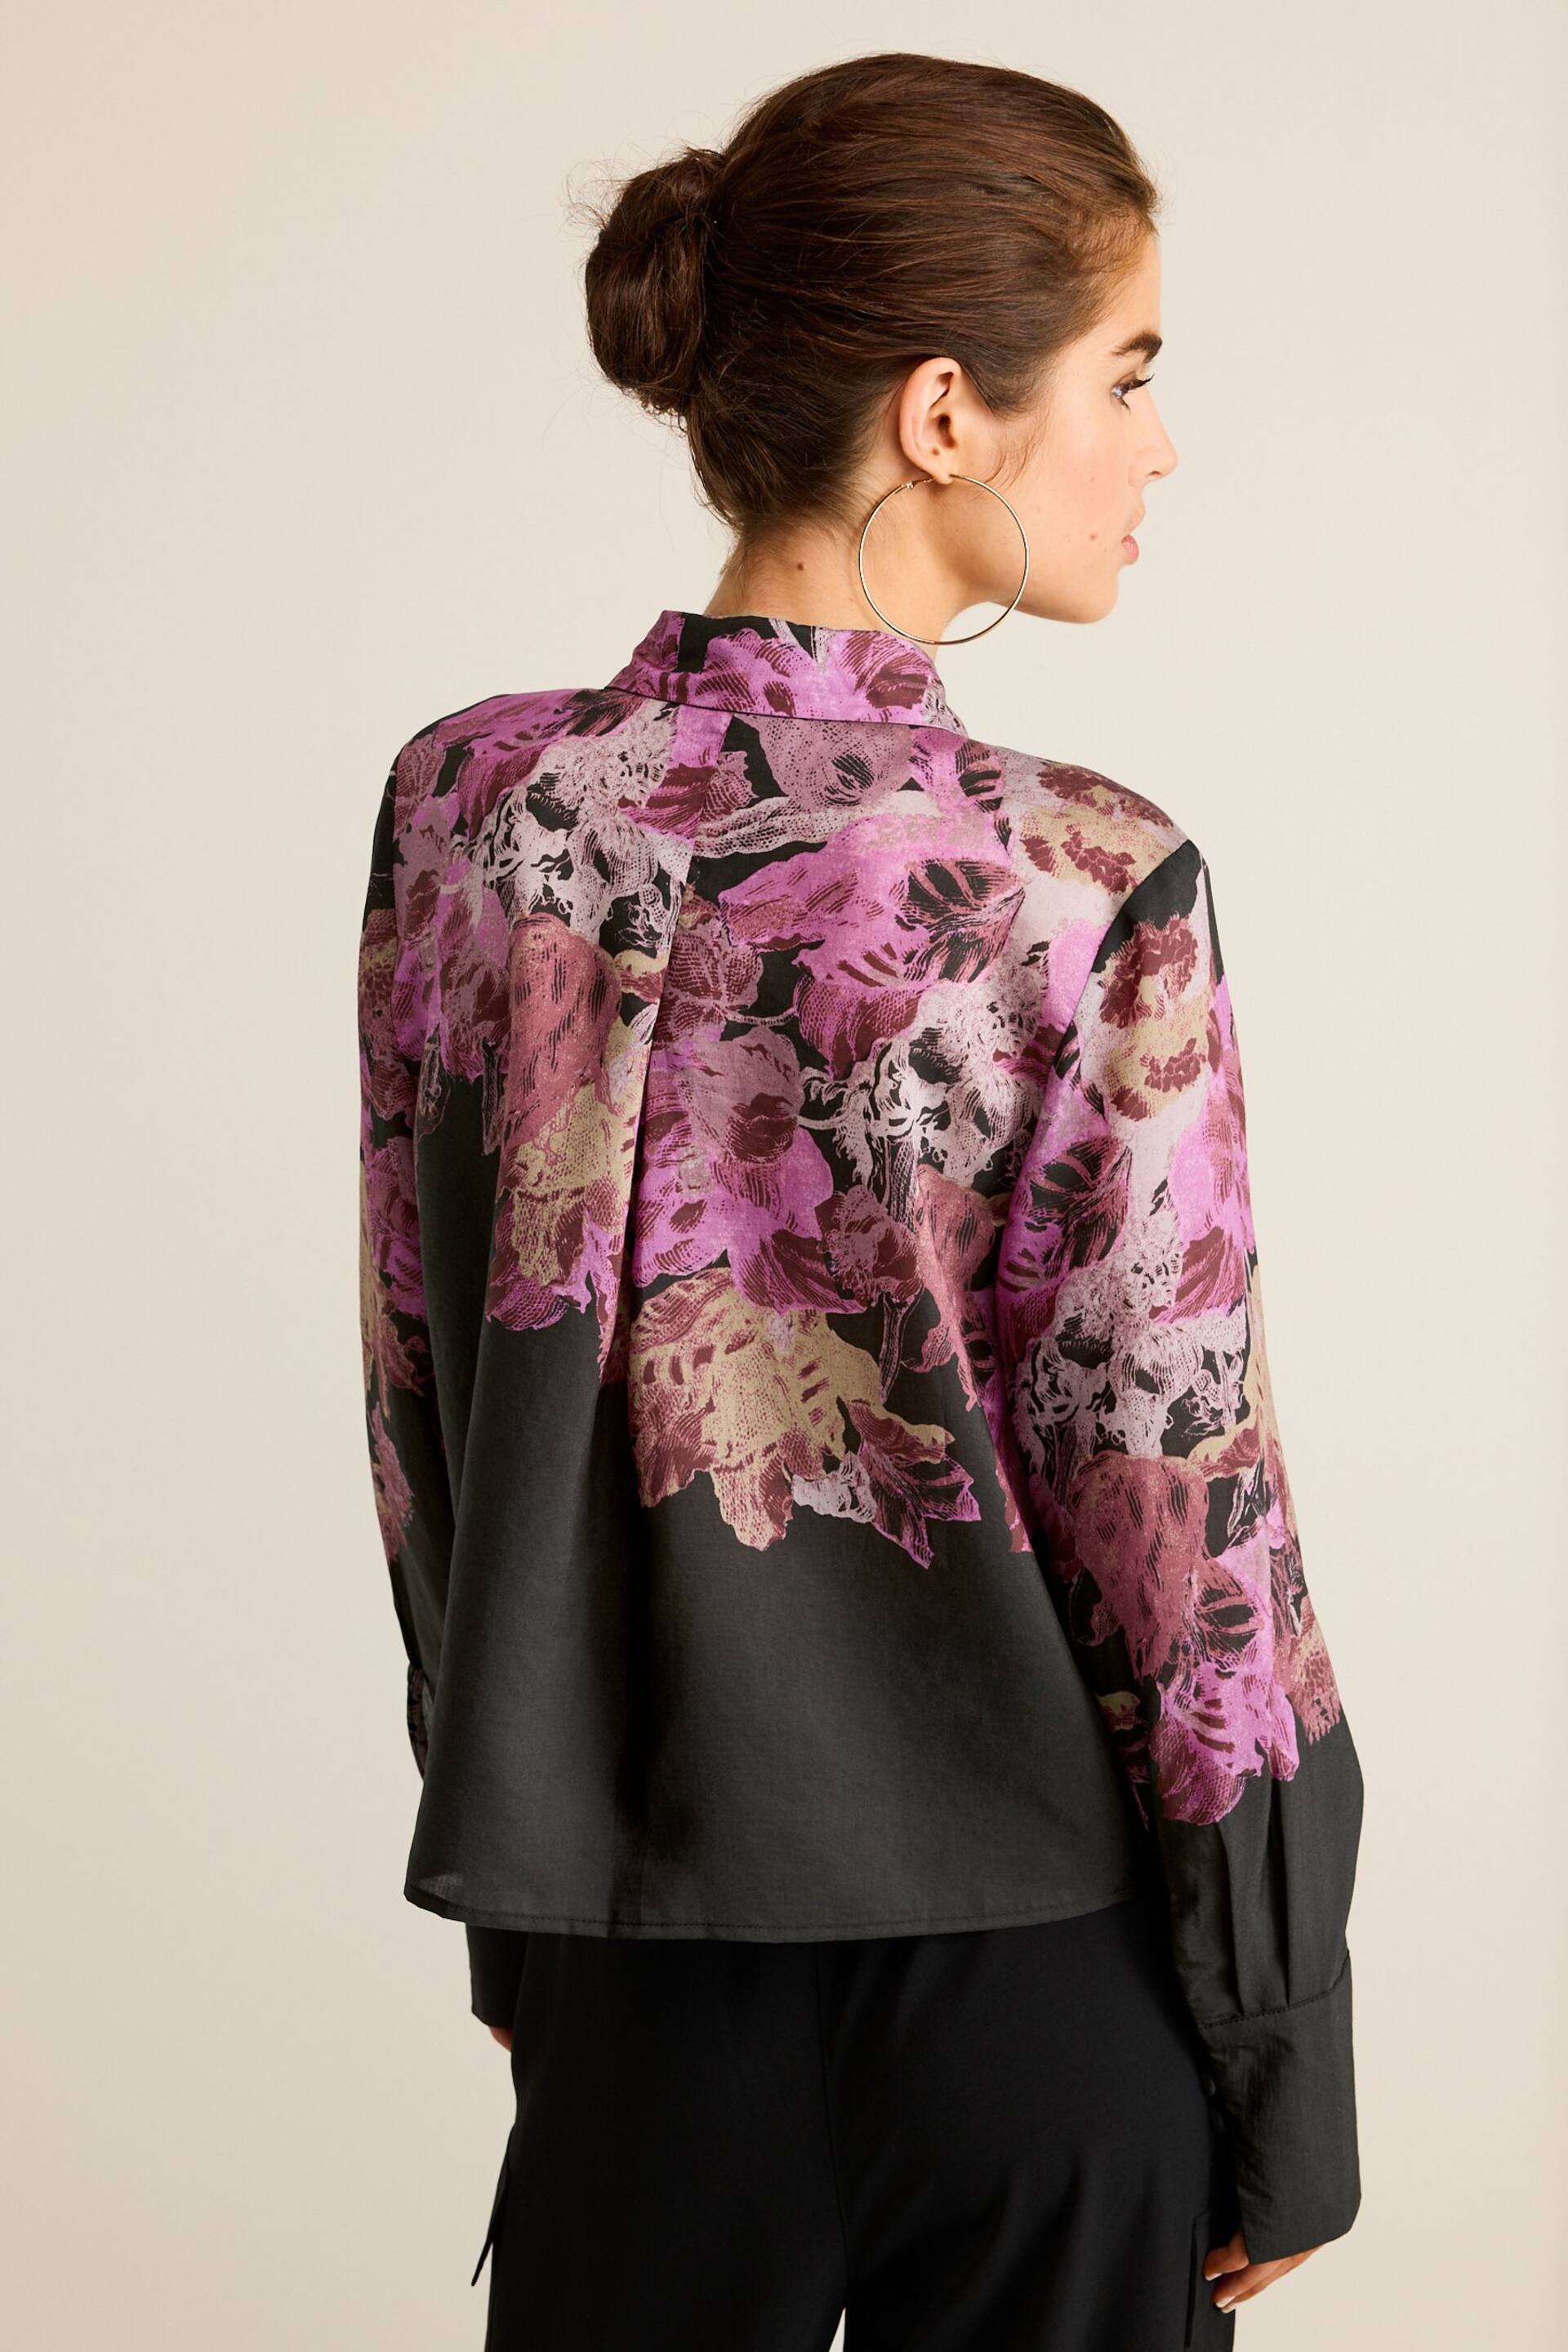 Purple/Black Floral Placement Sheer Placement Print Long Sleeve Shirt - Image 3 of 6